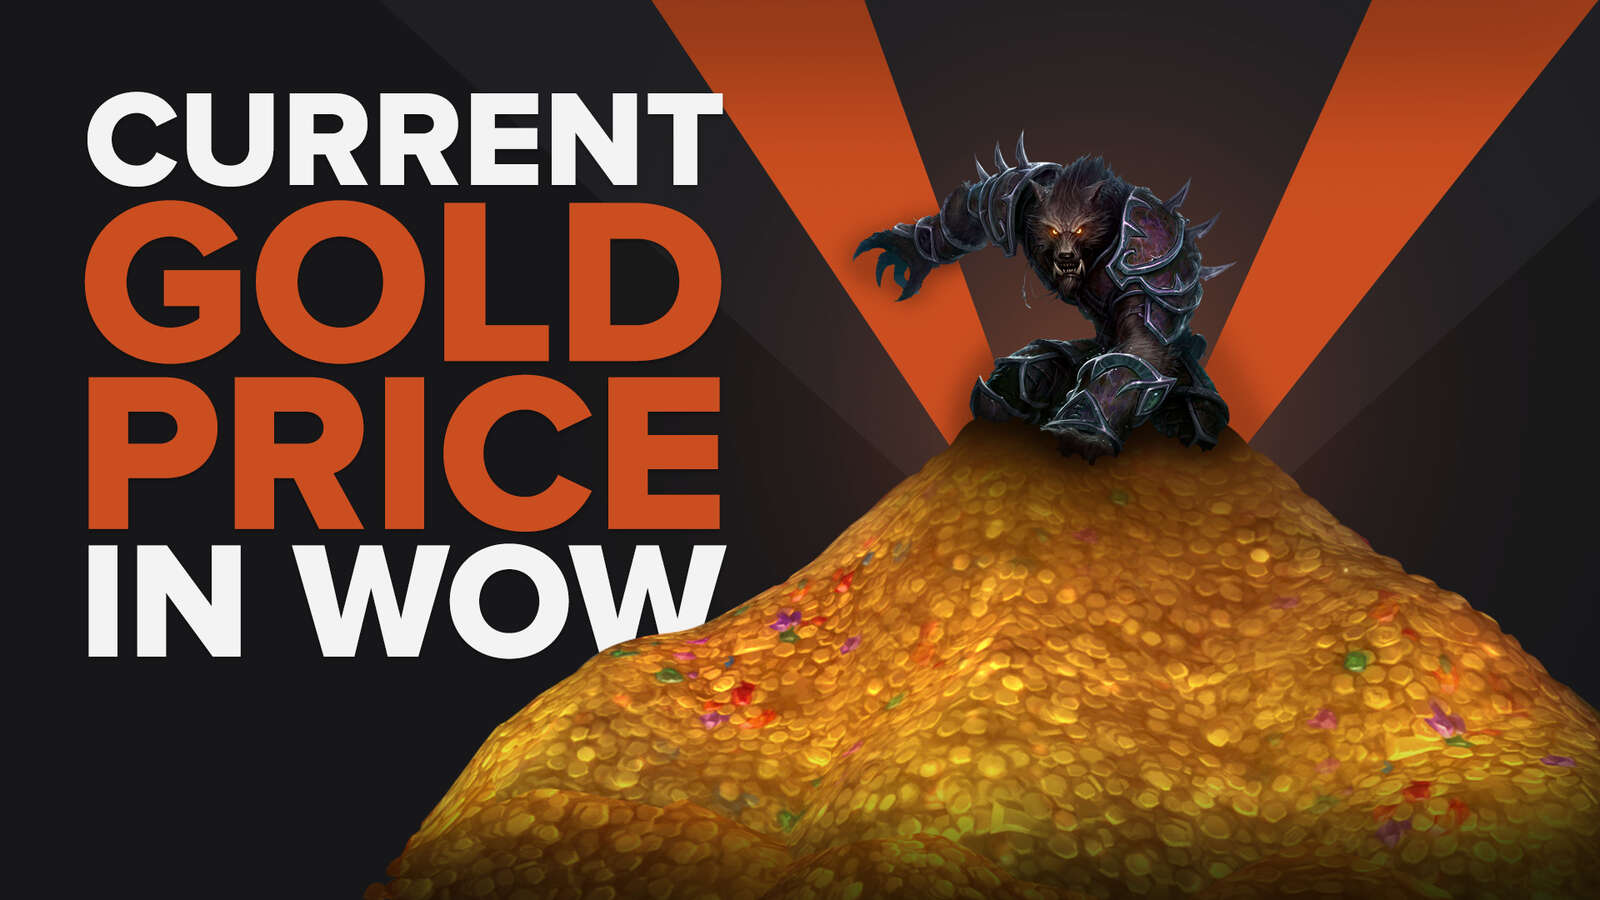 The Current Gold Price In World Of Warcraft (Time & Effort)